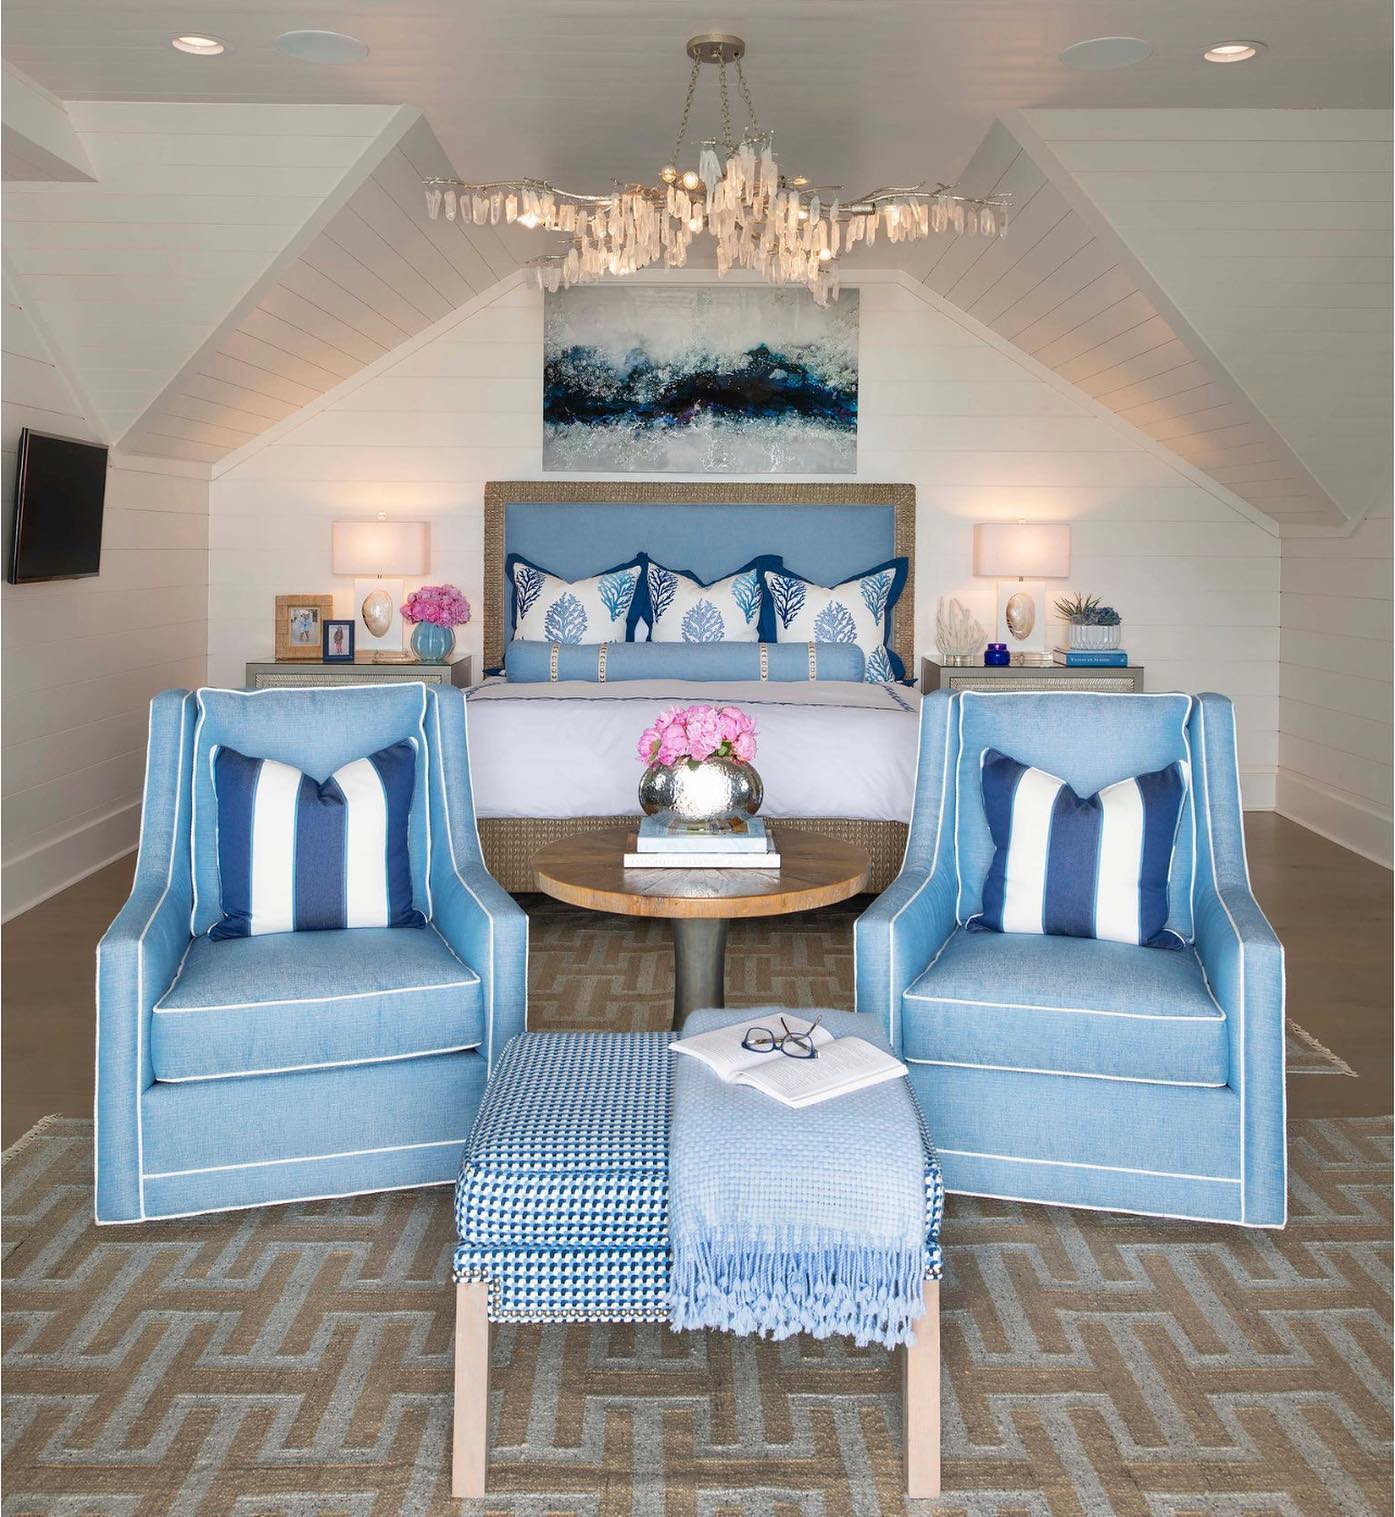 Waking up at the beach is good for the soul! See more of this #beachhousedesign in the #springissue of #IBBatHome. Interior design by @designershay @beth.rafferty All furnishings & decor available through our store in #Frisco. #30Astyle #lifeisbetteratthebeach #primarybedroomdesign #Floridadesign #designinspiration #designmagazine #interiordesign #beachhousedecor #customfurniture #travelingdesigner #teamIBB